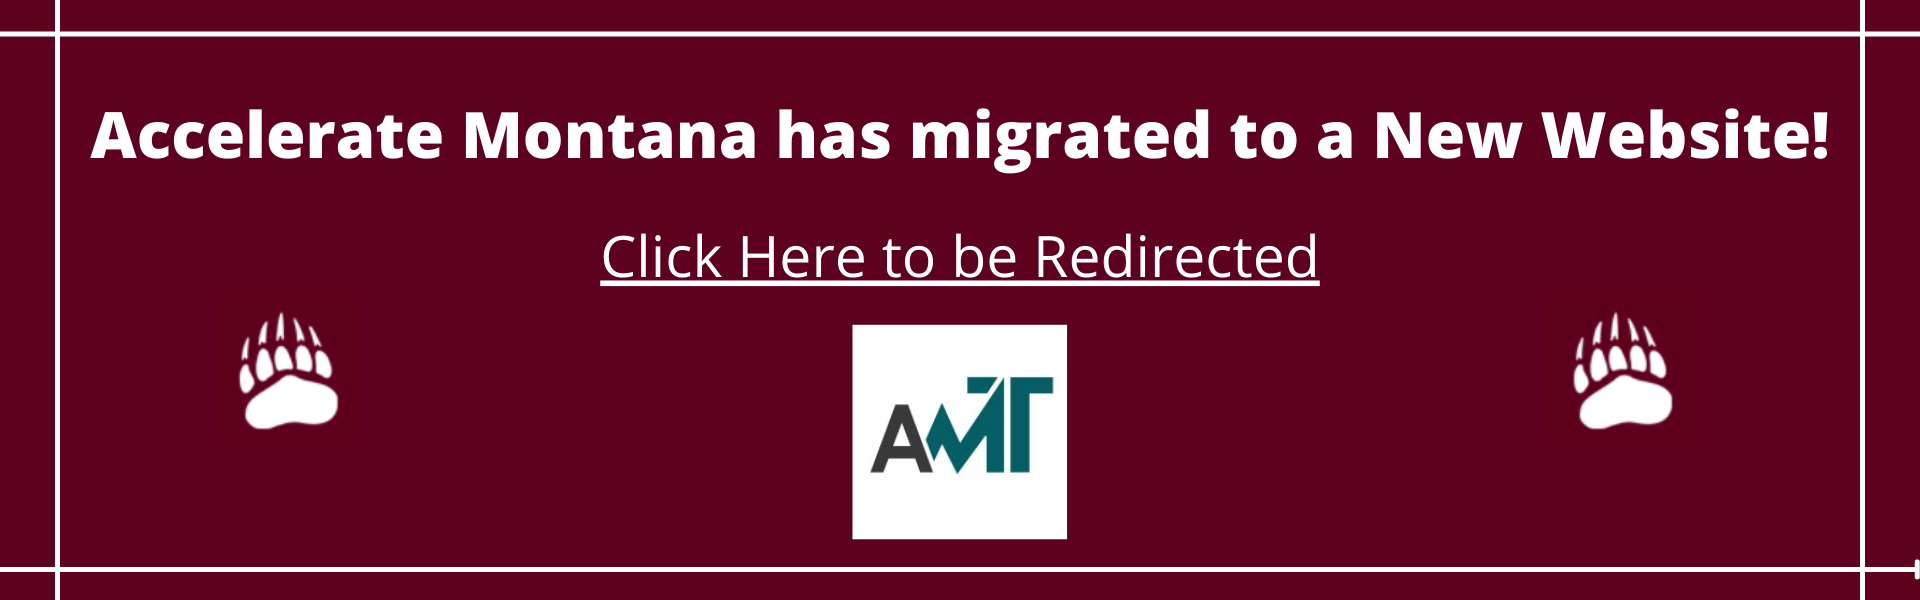 accelerate-montana-has-migrated-to-a-new-website.png